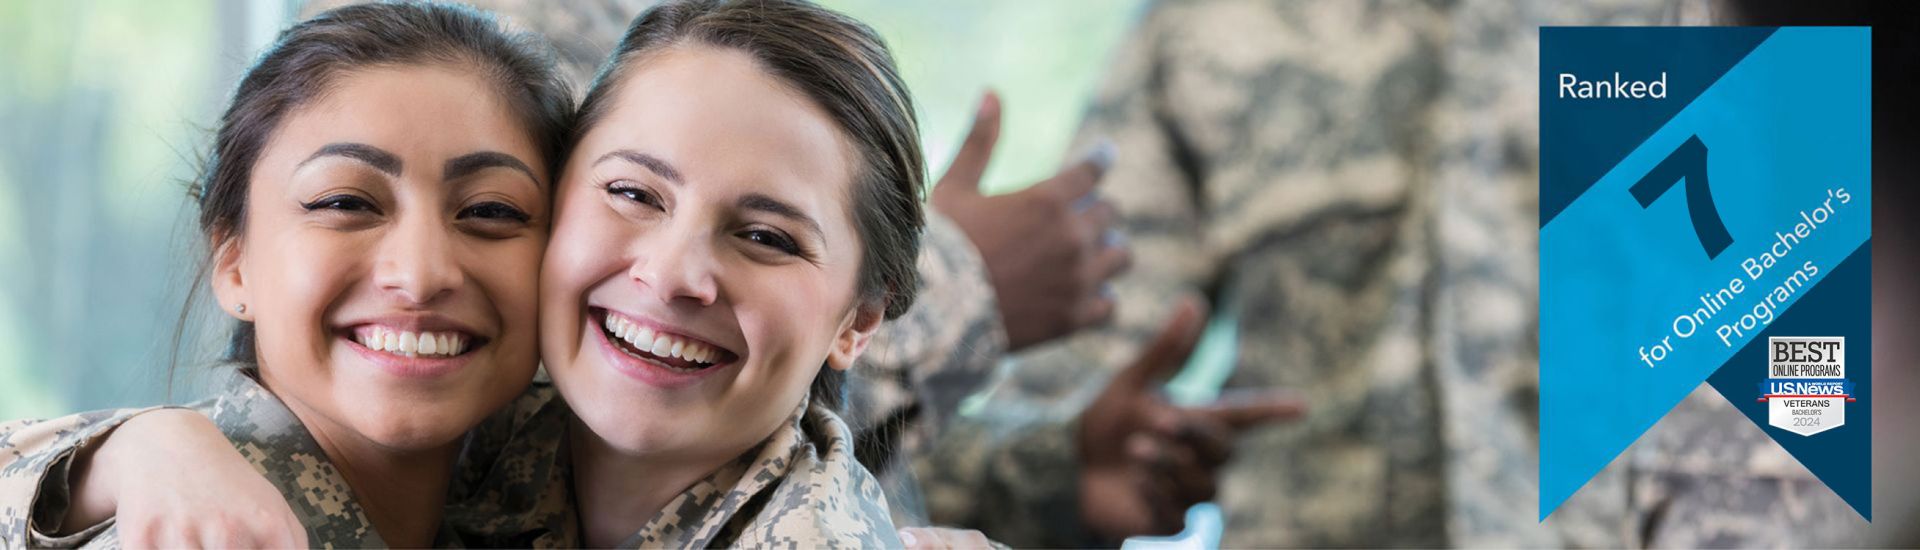 Two people in military fatigues hugging and smiling | banner overlaid that reads Ranked 8 for online bachelor's programs